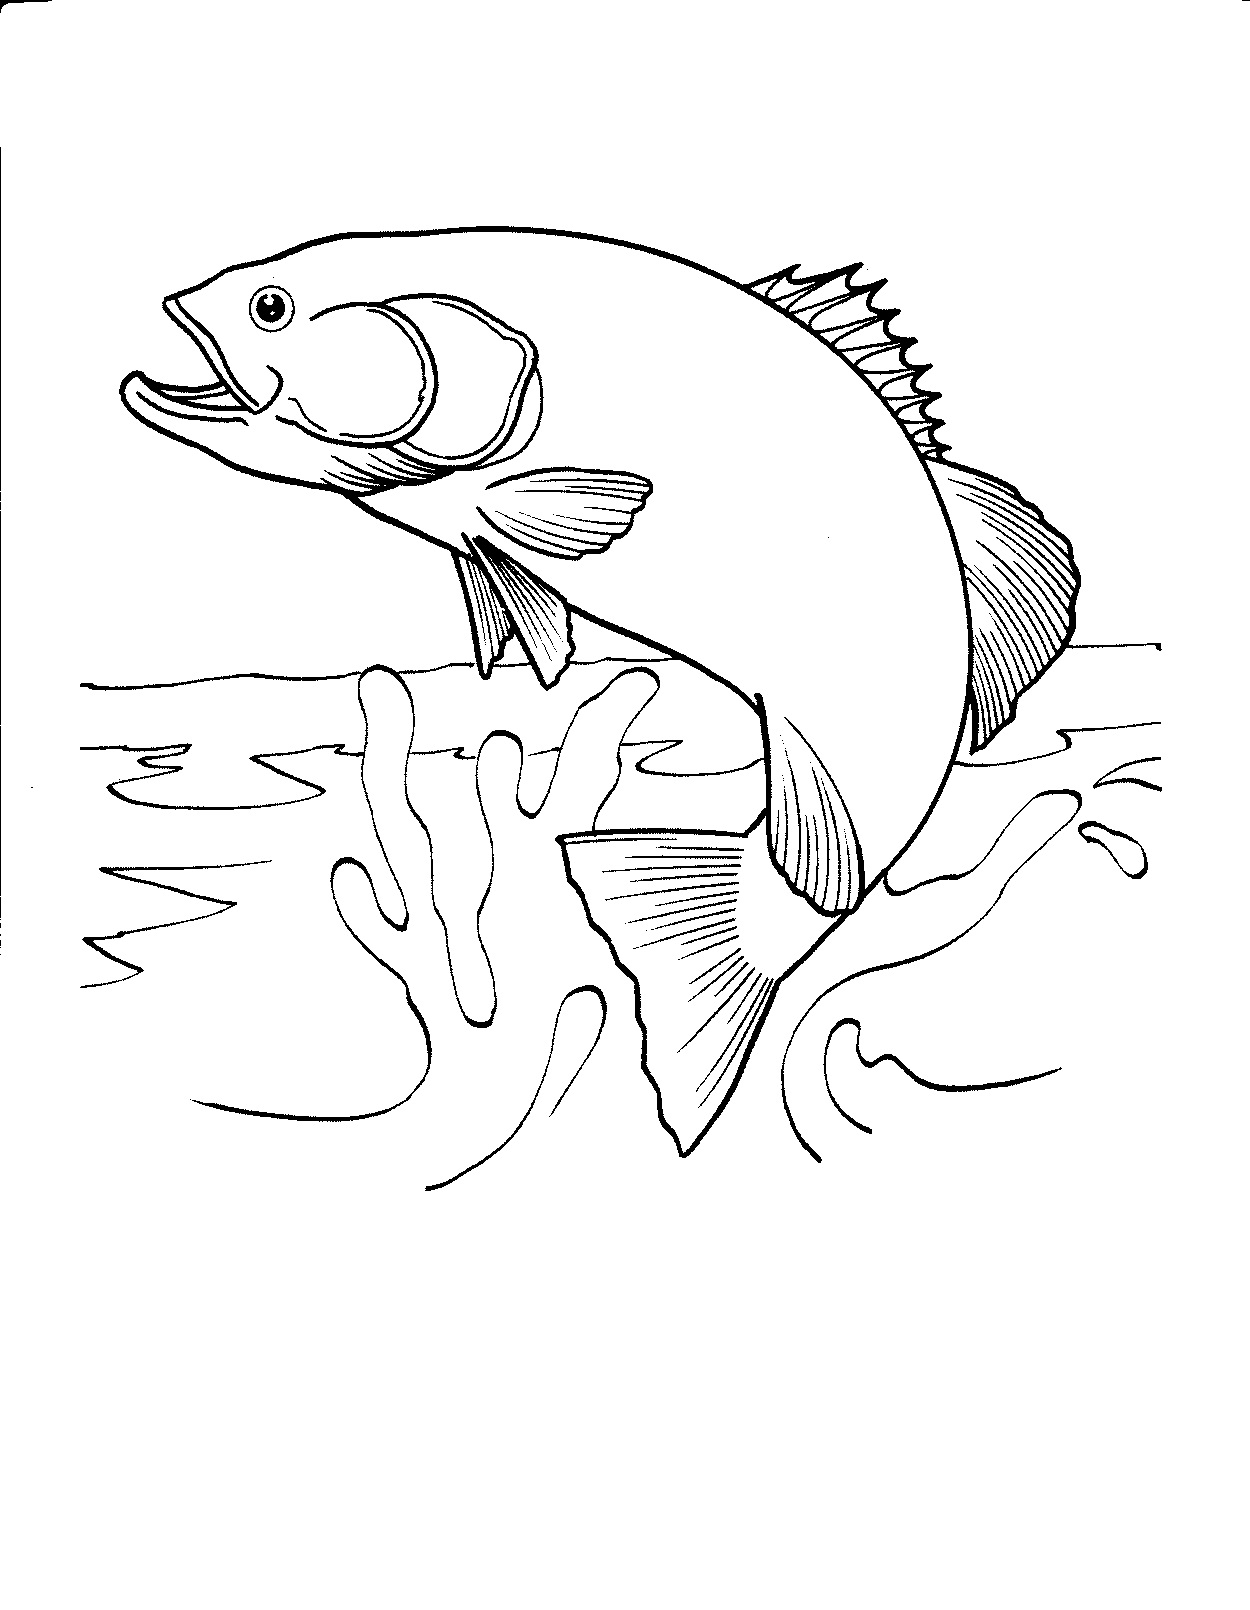 Coloring Pages Fishing Free Printable Fish Coloring Pages For Kids